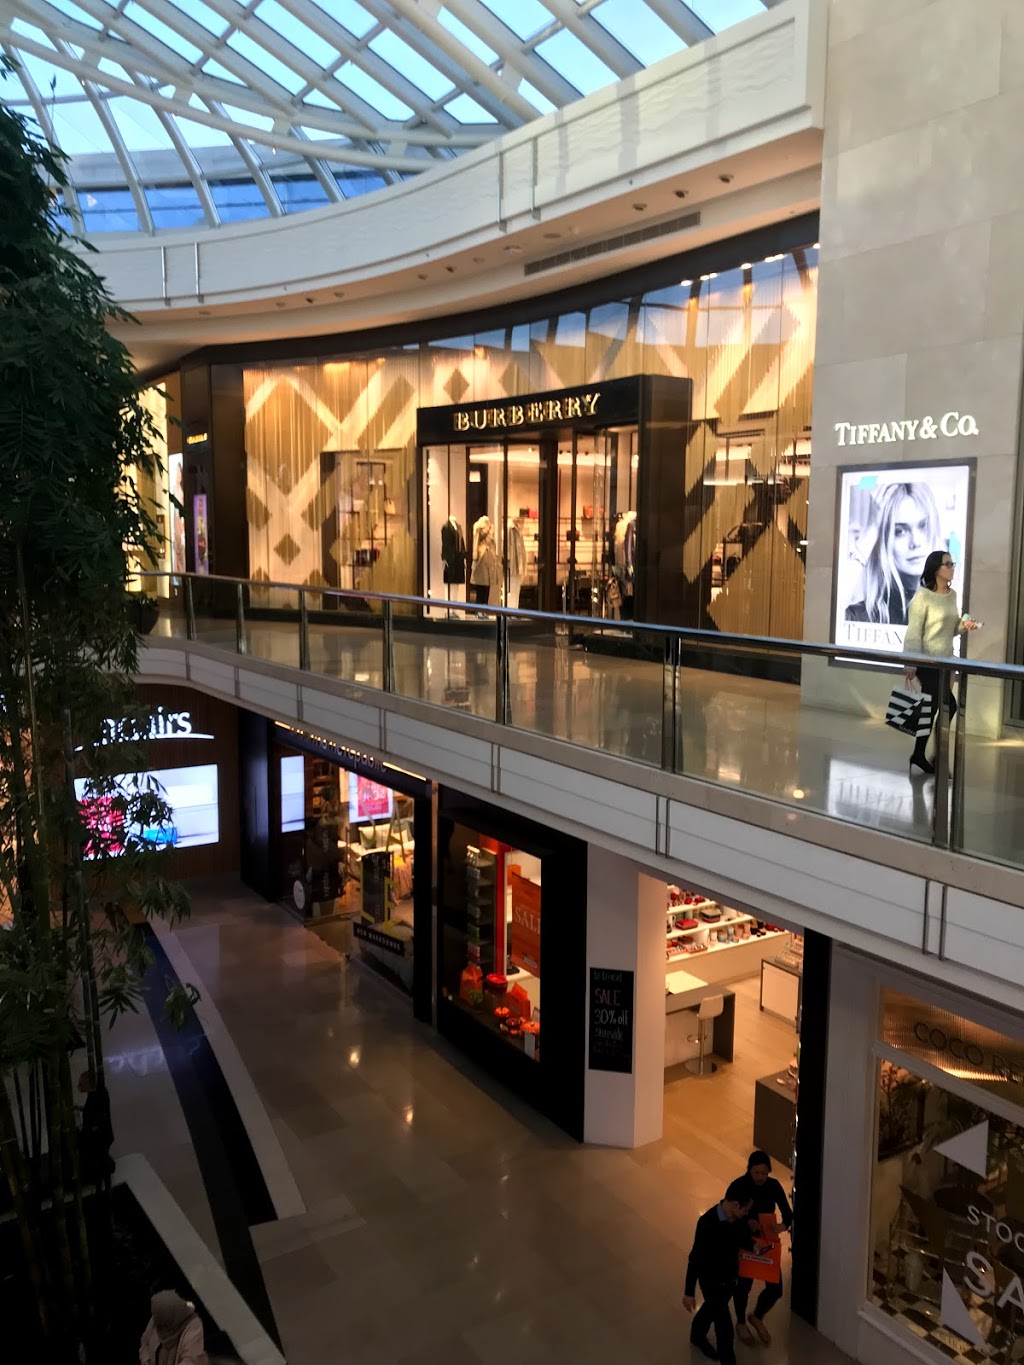 Burberry - Clothing store | Shop G044 